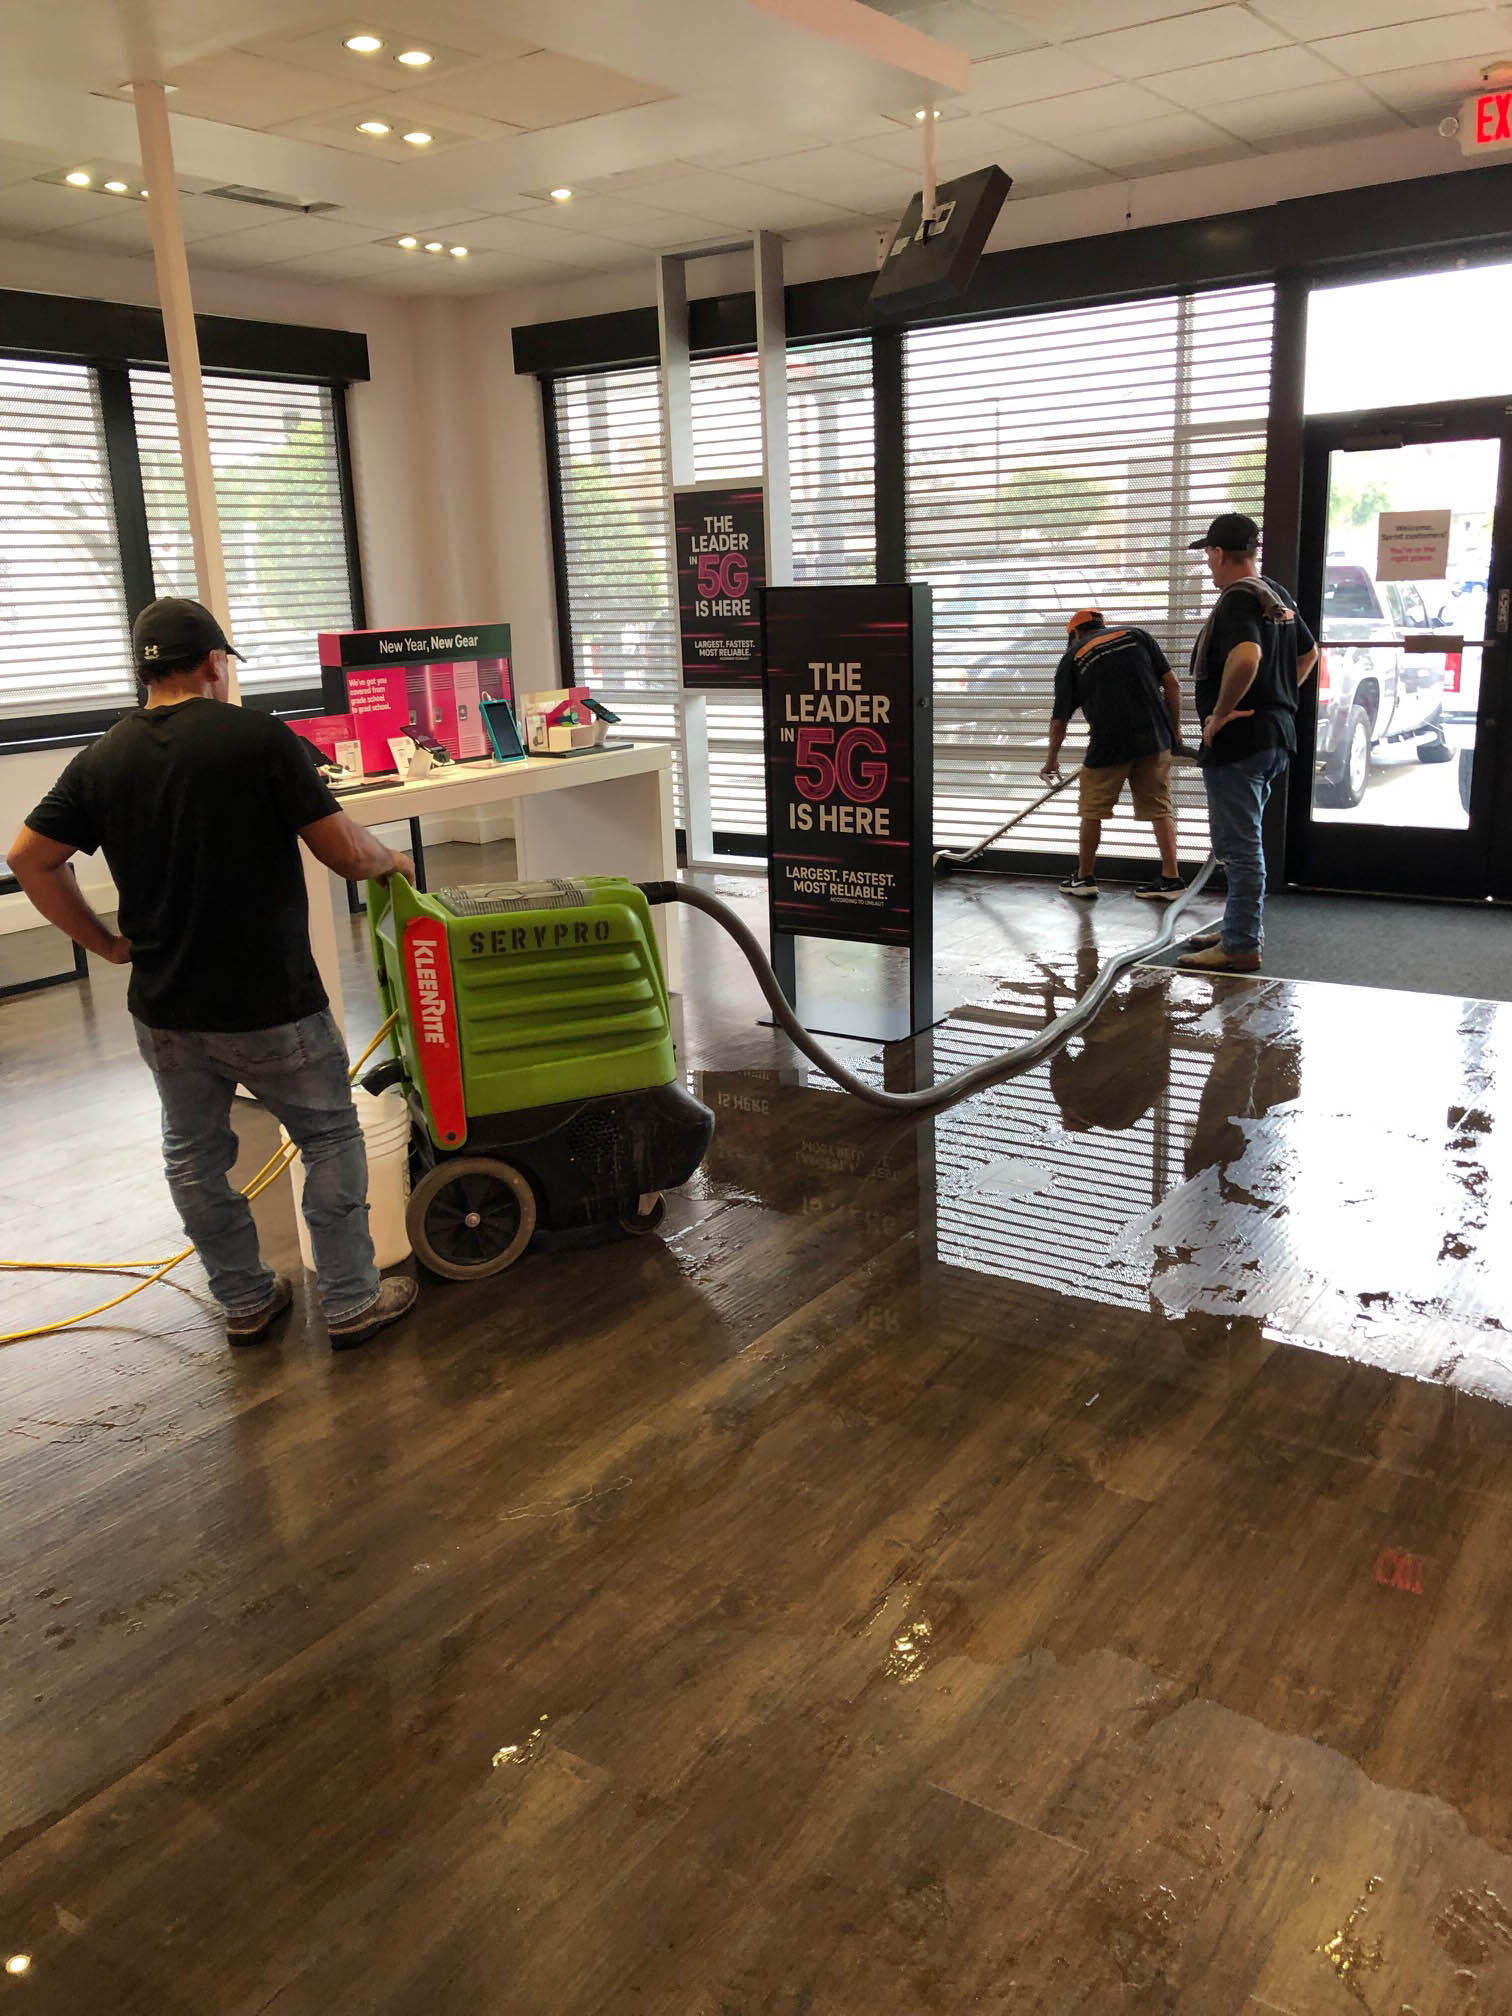 If your home or business in Waterford Estates, TX is damaged by water, mold, or fire, you can count on SERVPRO of South Garland to restore your property. We respond quickly to any size loss, 24 hours a day, 7 days a week. Don't hesitate and give us a call today!